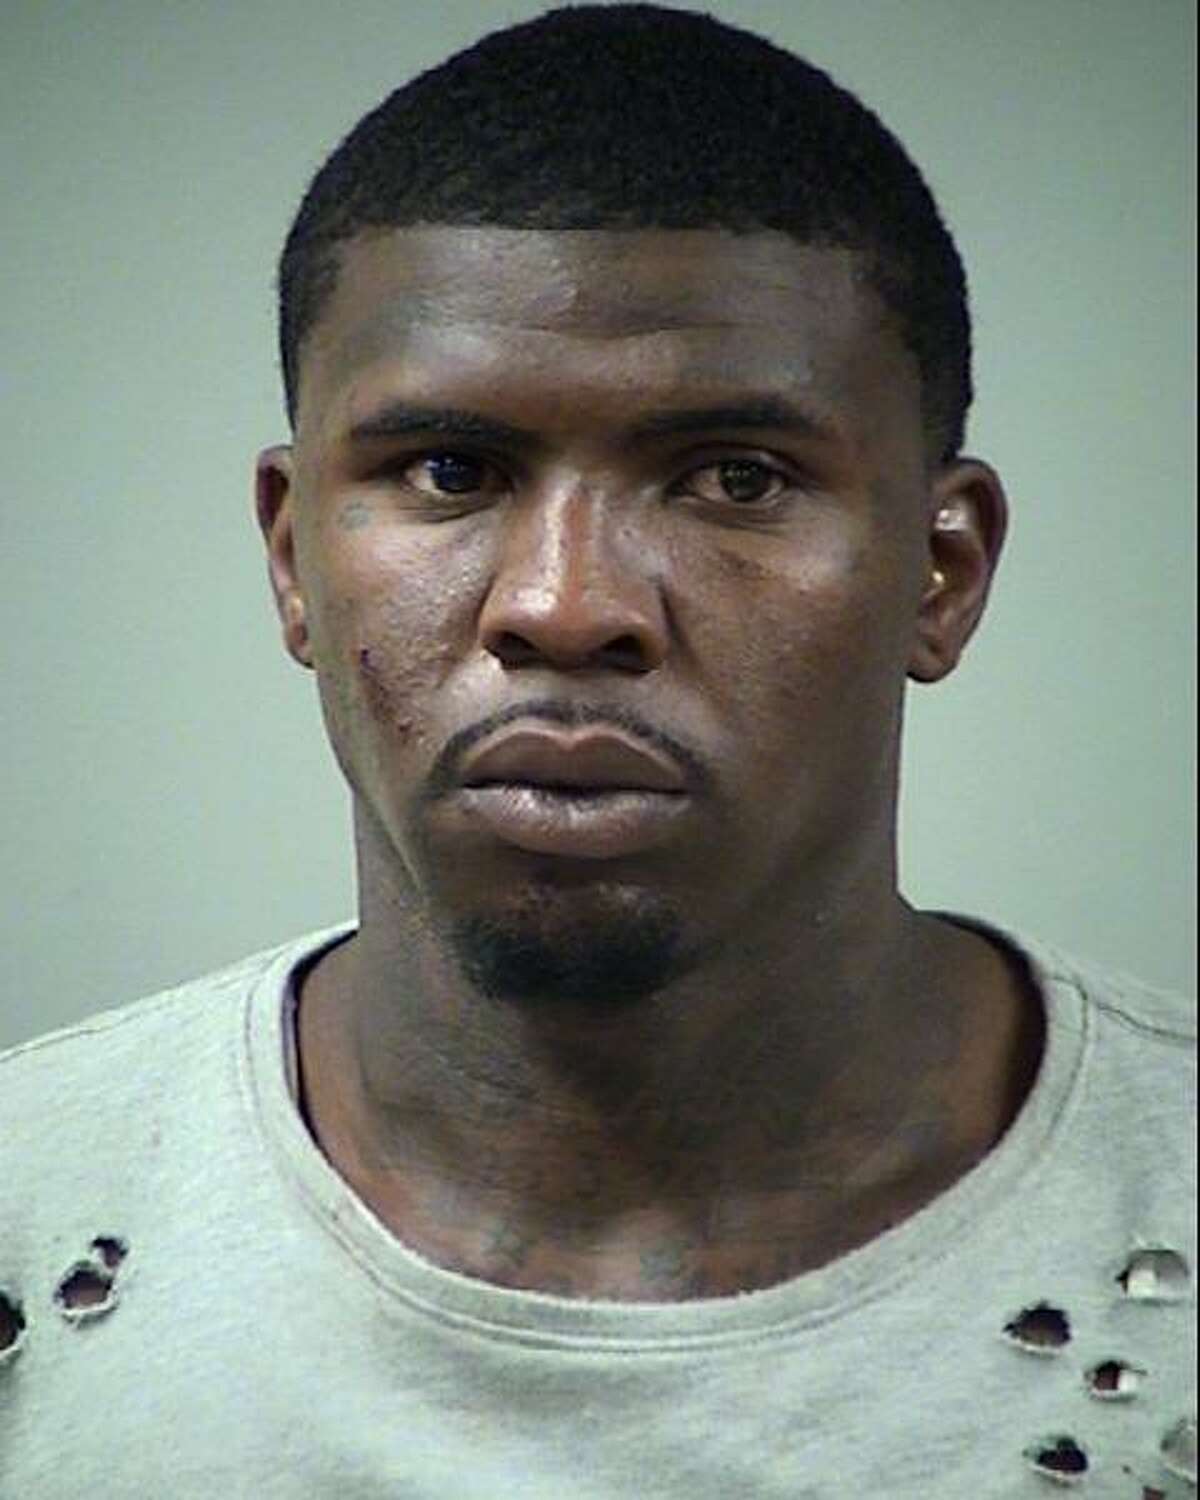 Prosecutors dismissed an indictment against Tramone Mykel Anderson, 25, who was charged in connection with the drive-by shooting death of 4-year-old De-Earlvion Whitley in 2017.